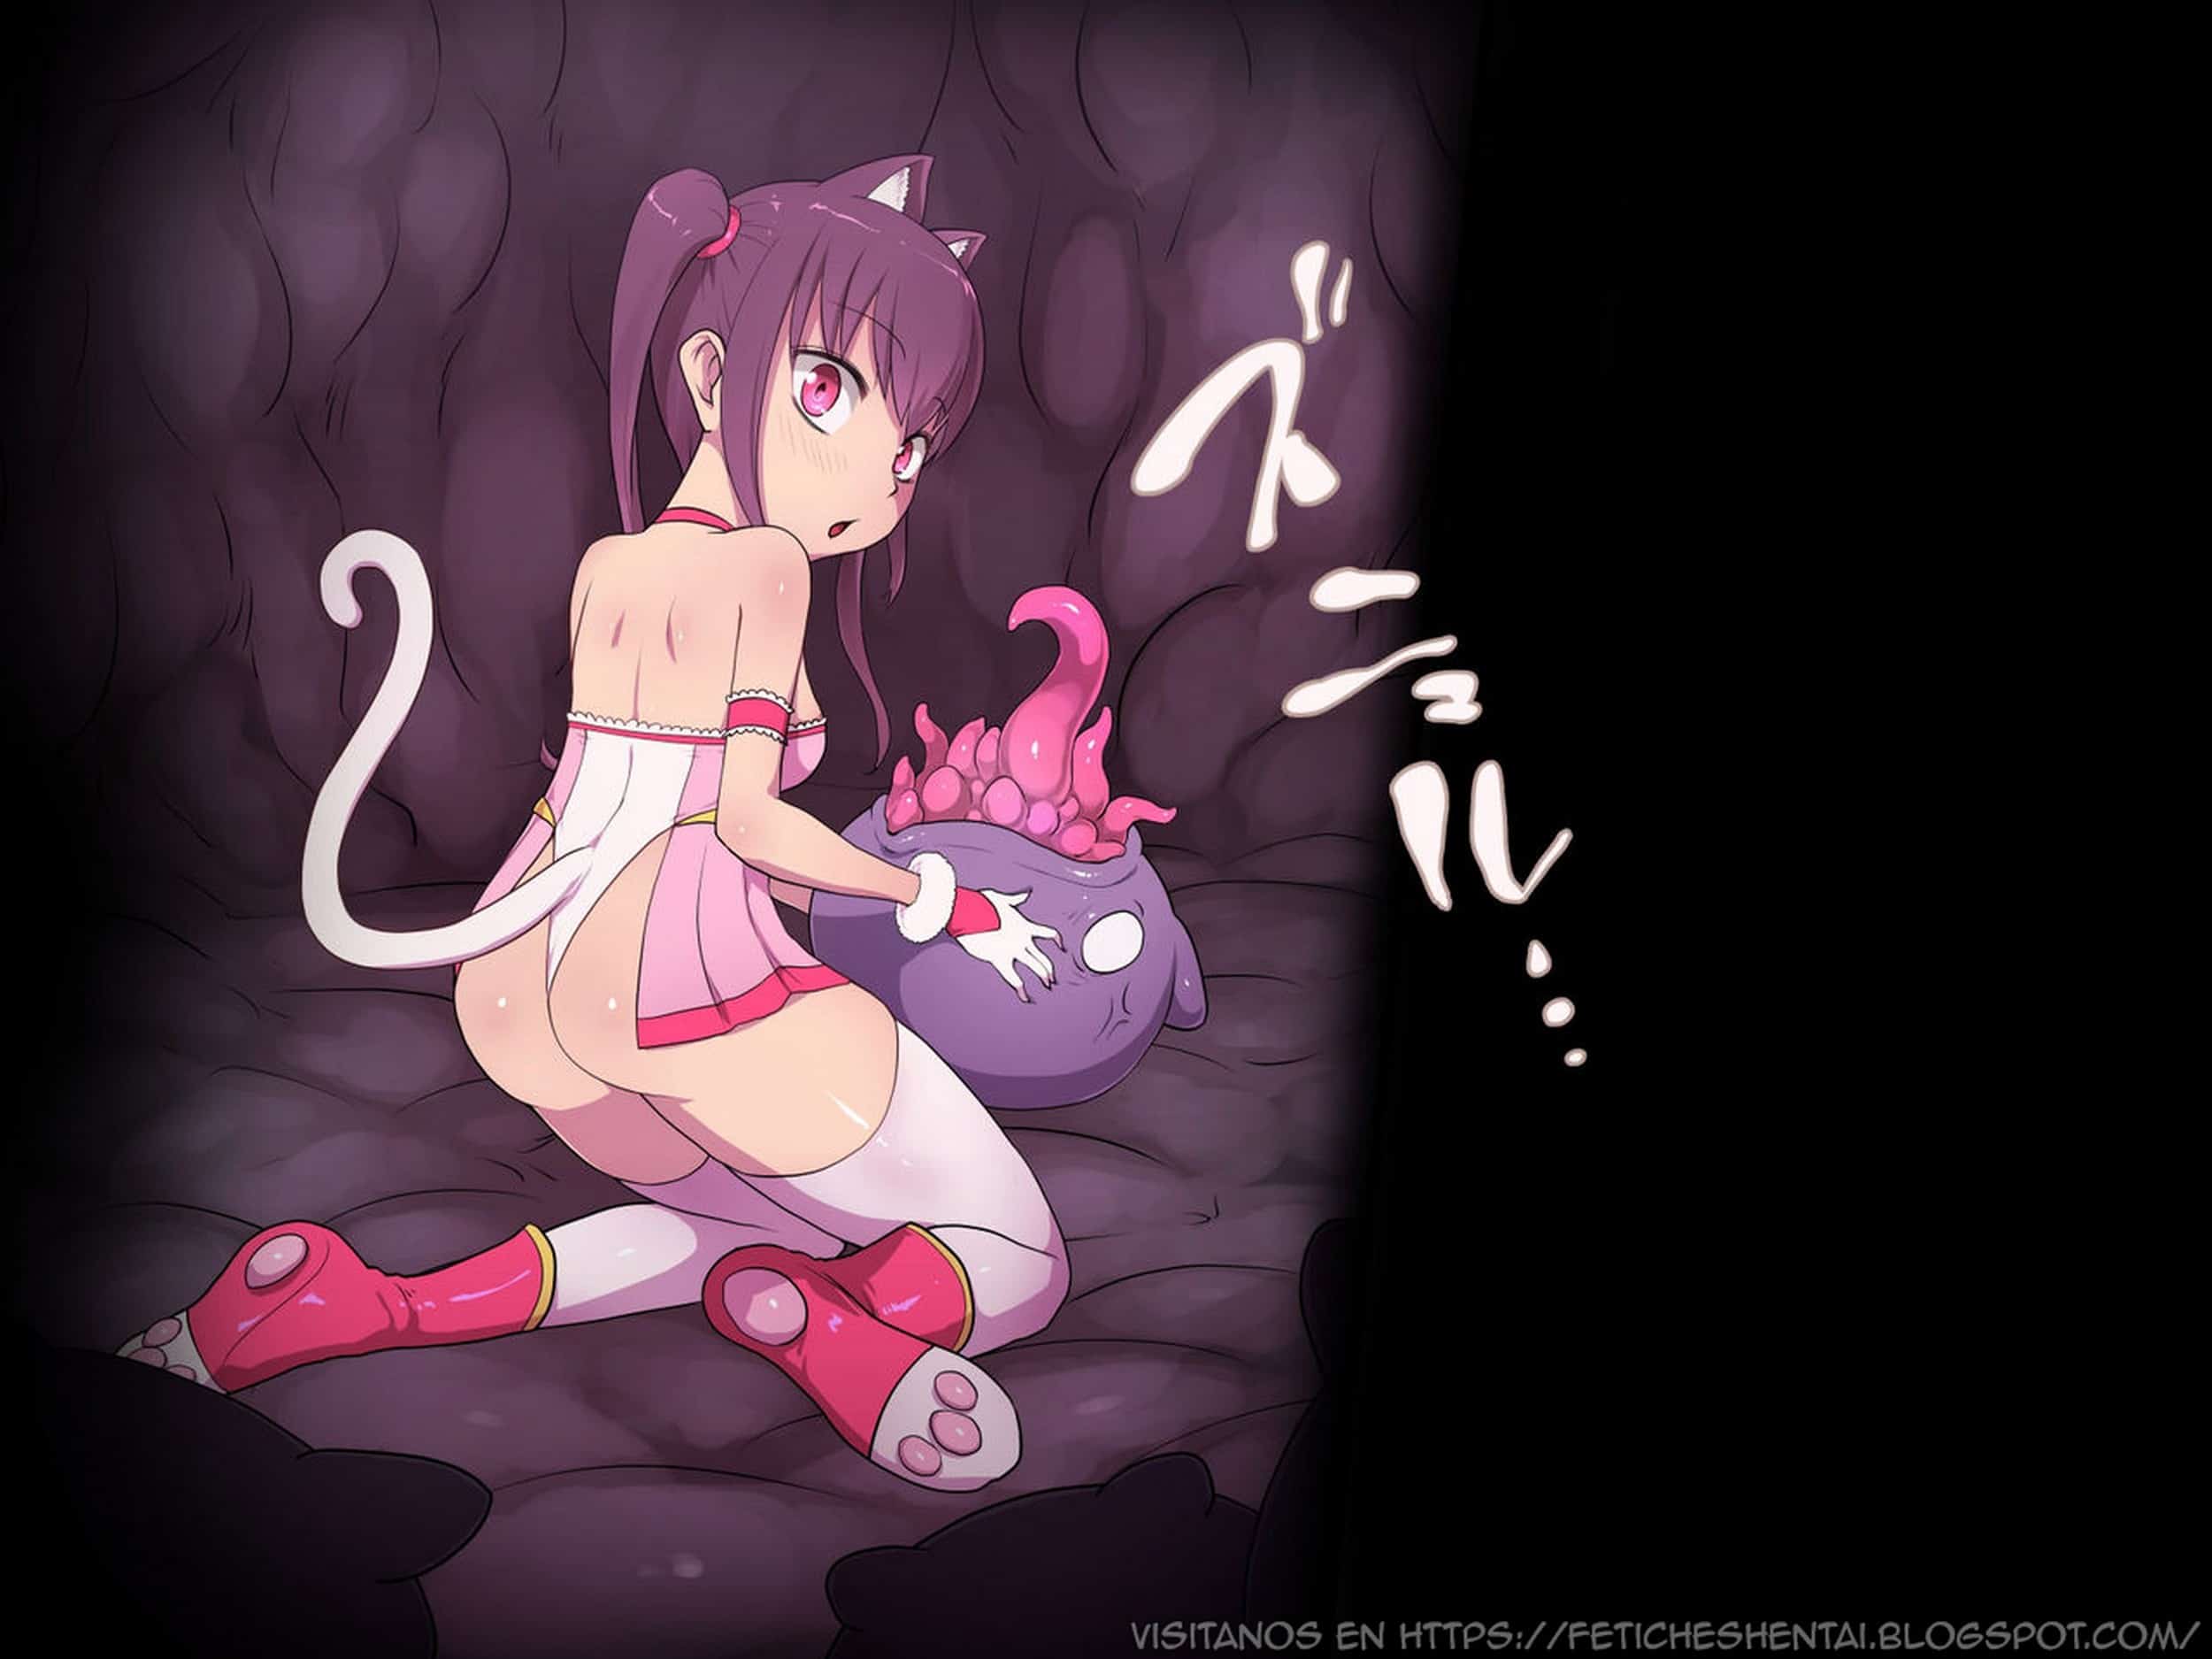 [Numeko] Mia, Magical Girl with Cat Ears vs Monsters with Tentacles - 2